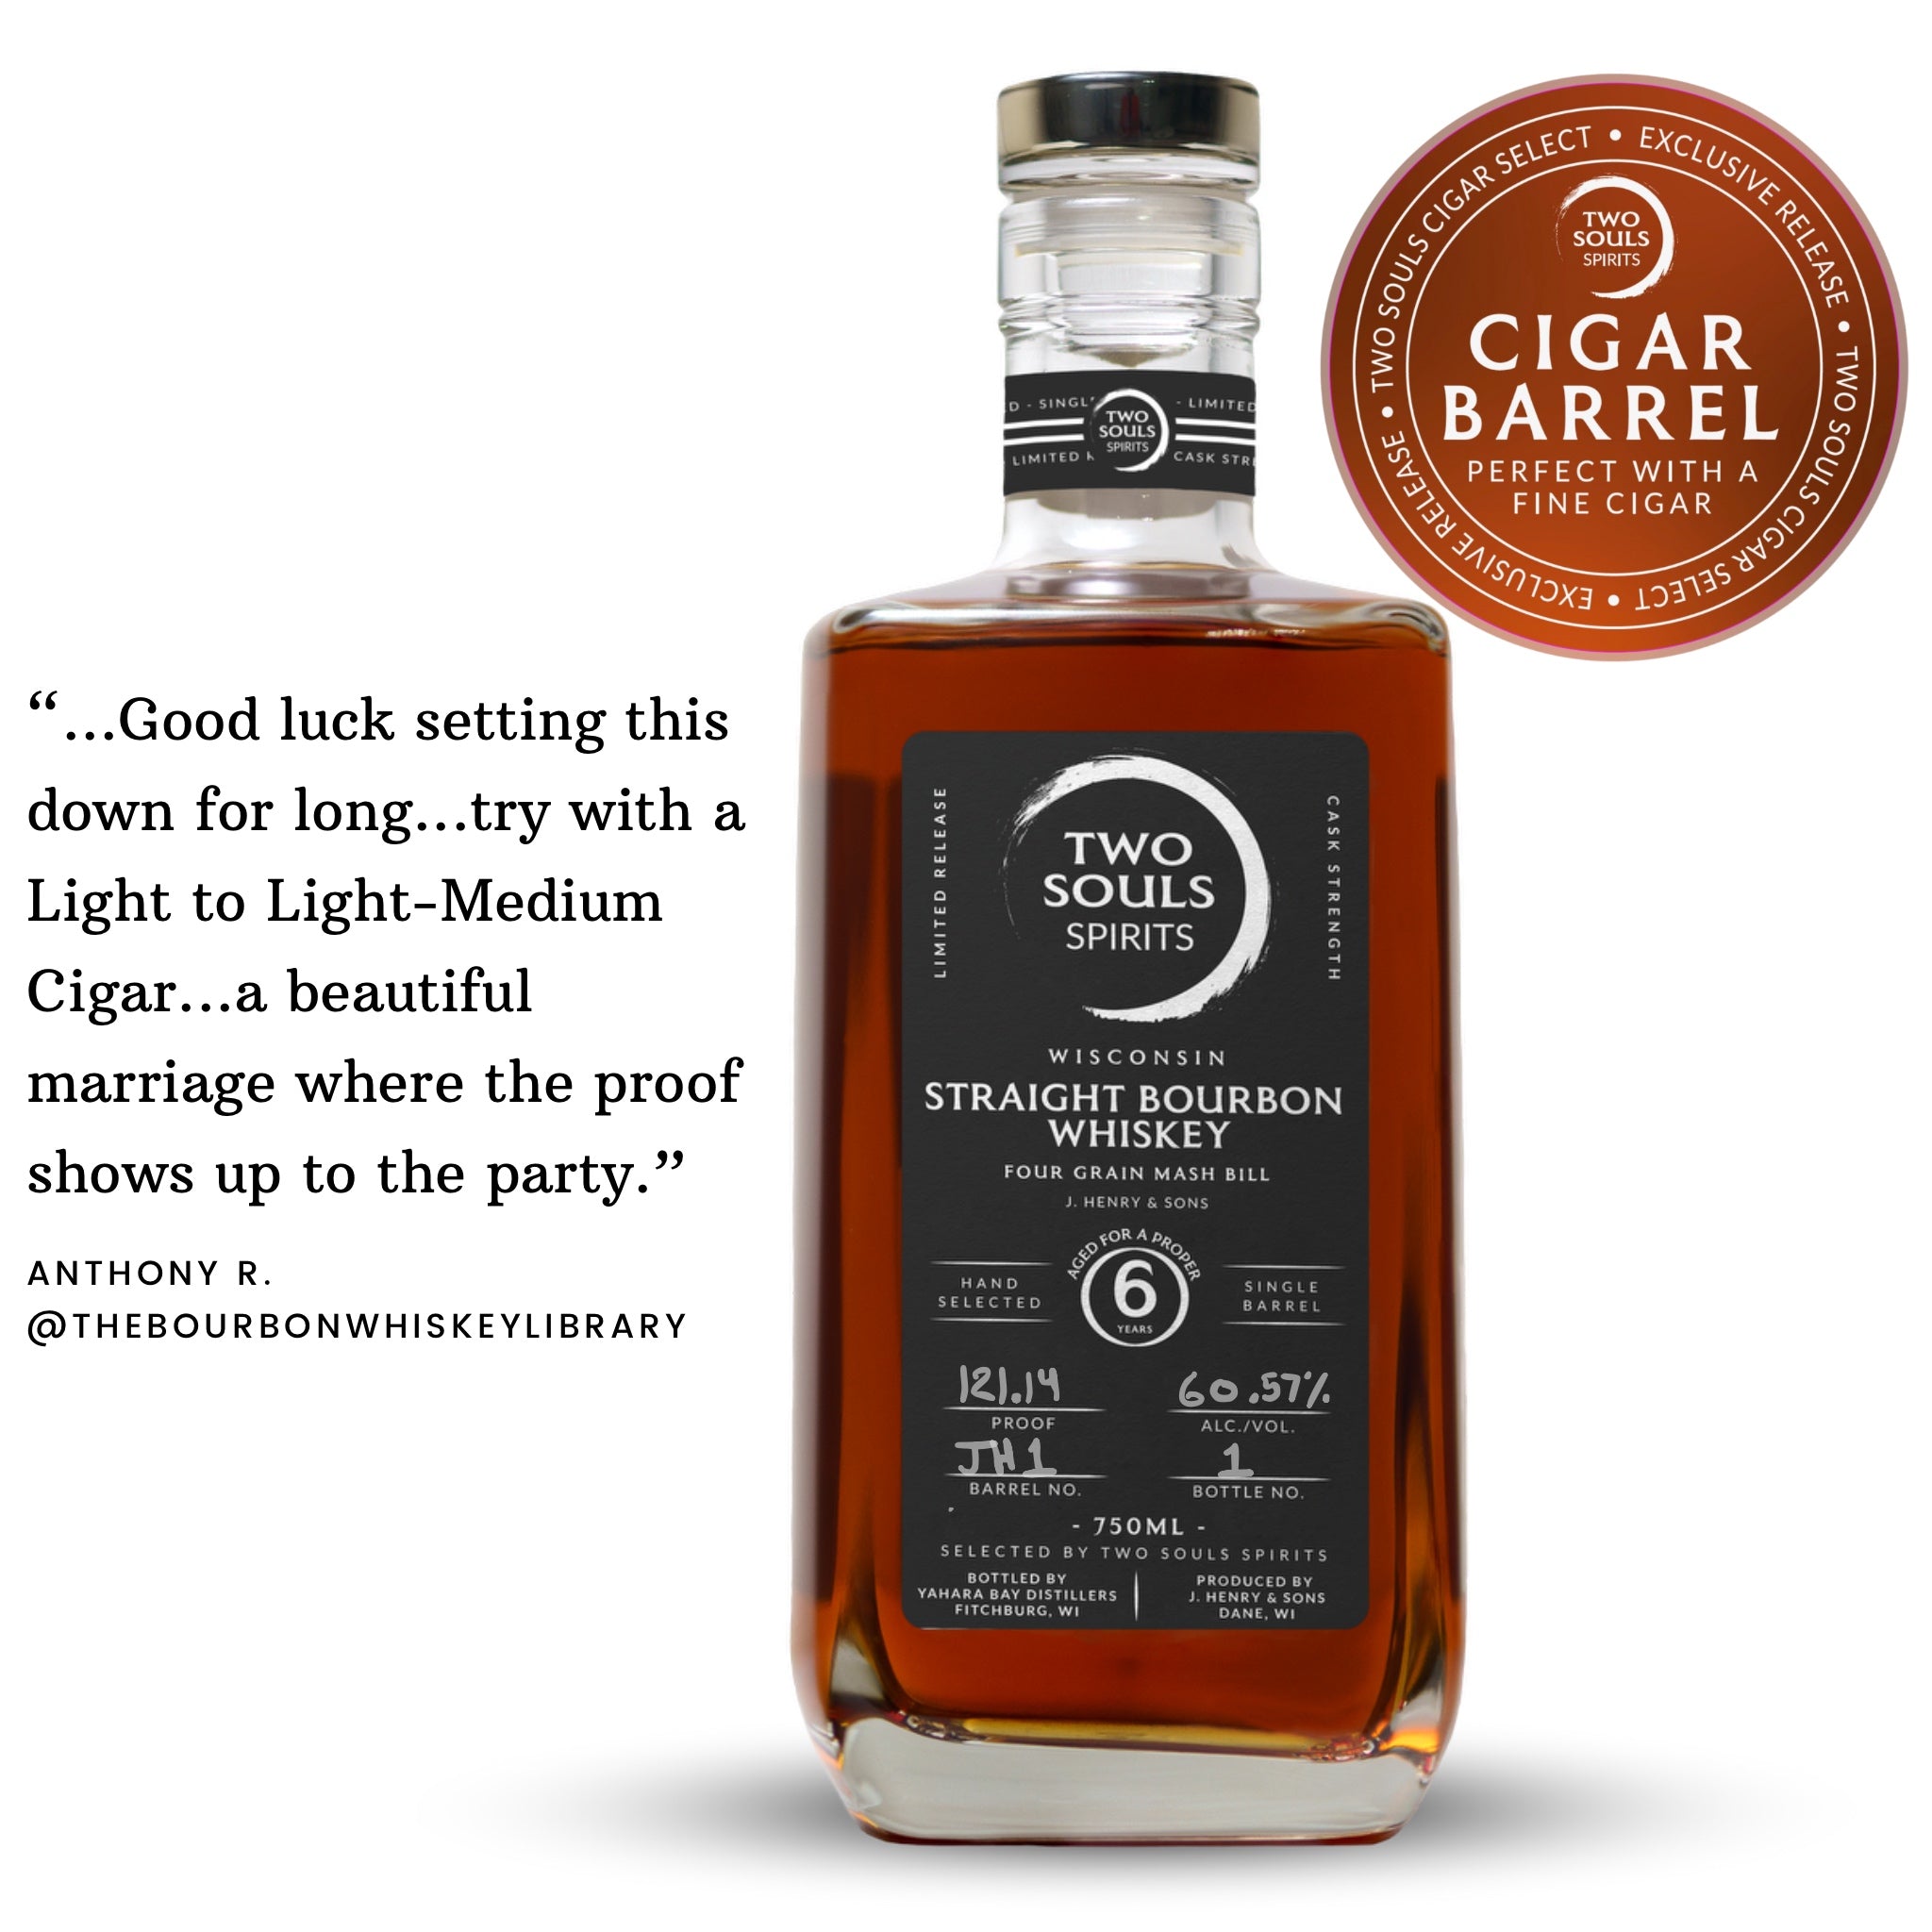 6-Year Wisconsin Straight Bourbon Whiskey Featuring J. Henry & Sons